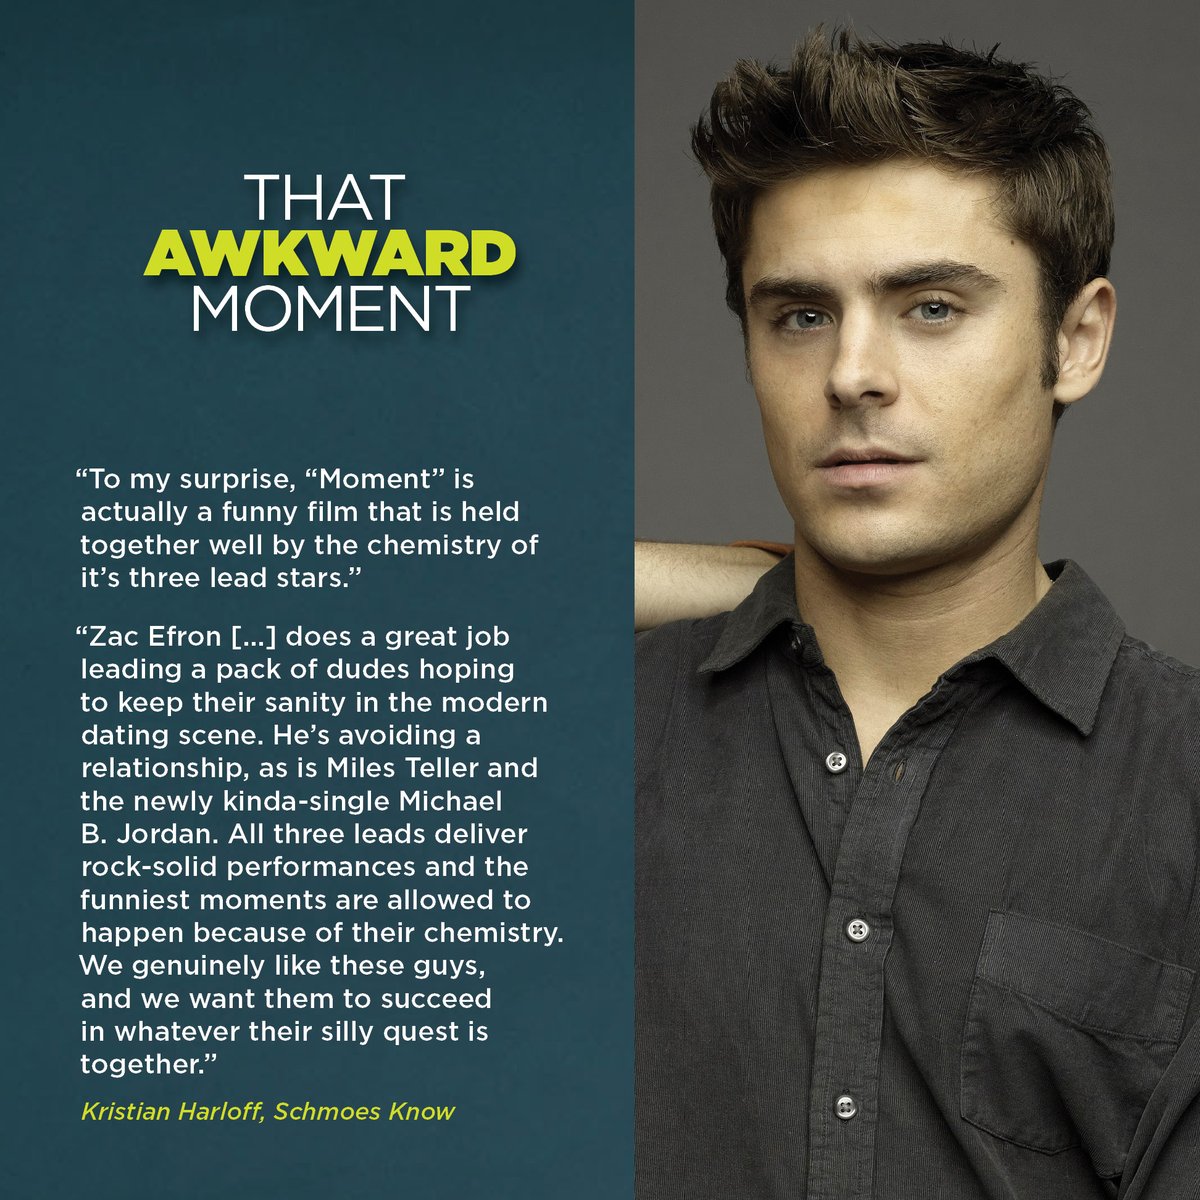 “To my surprise, “Moment” is actually a funny film that is held together well by the chemistry of it’s three lead stars.” 

#ThatAwkwardMoment #TAM #ZacEfron